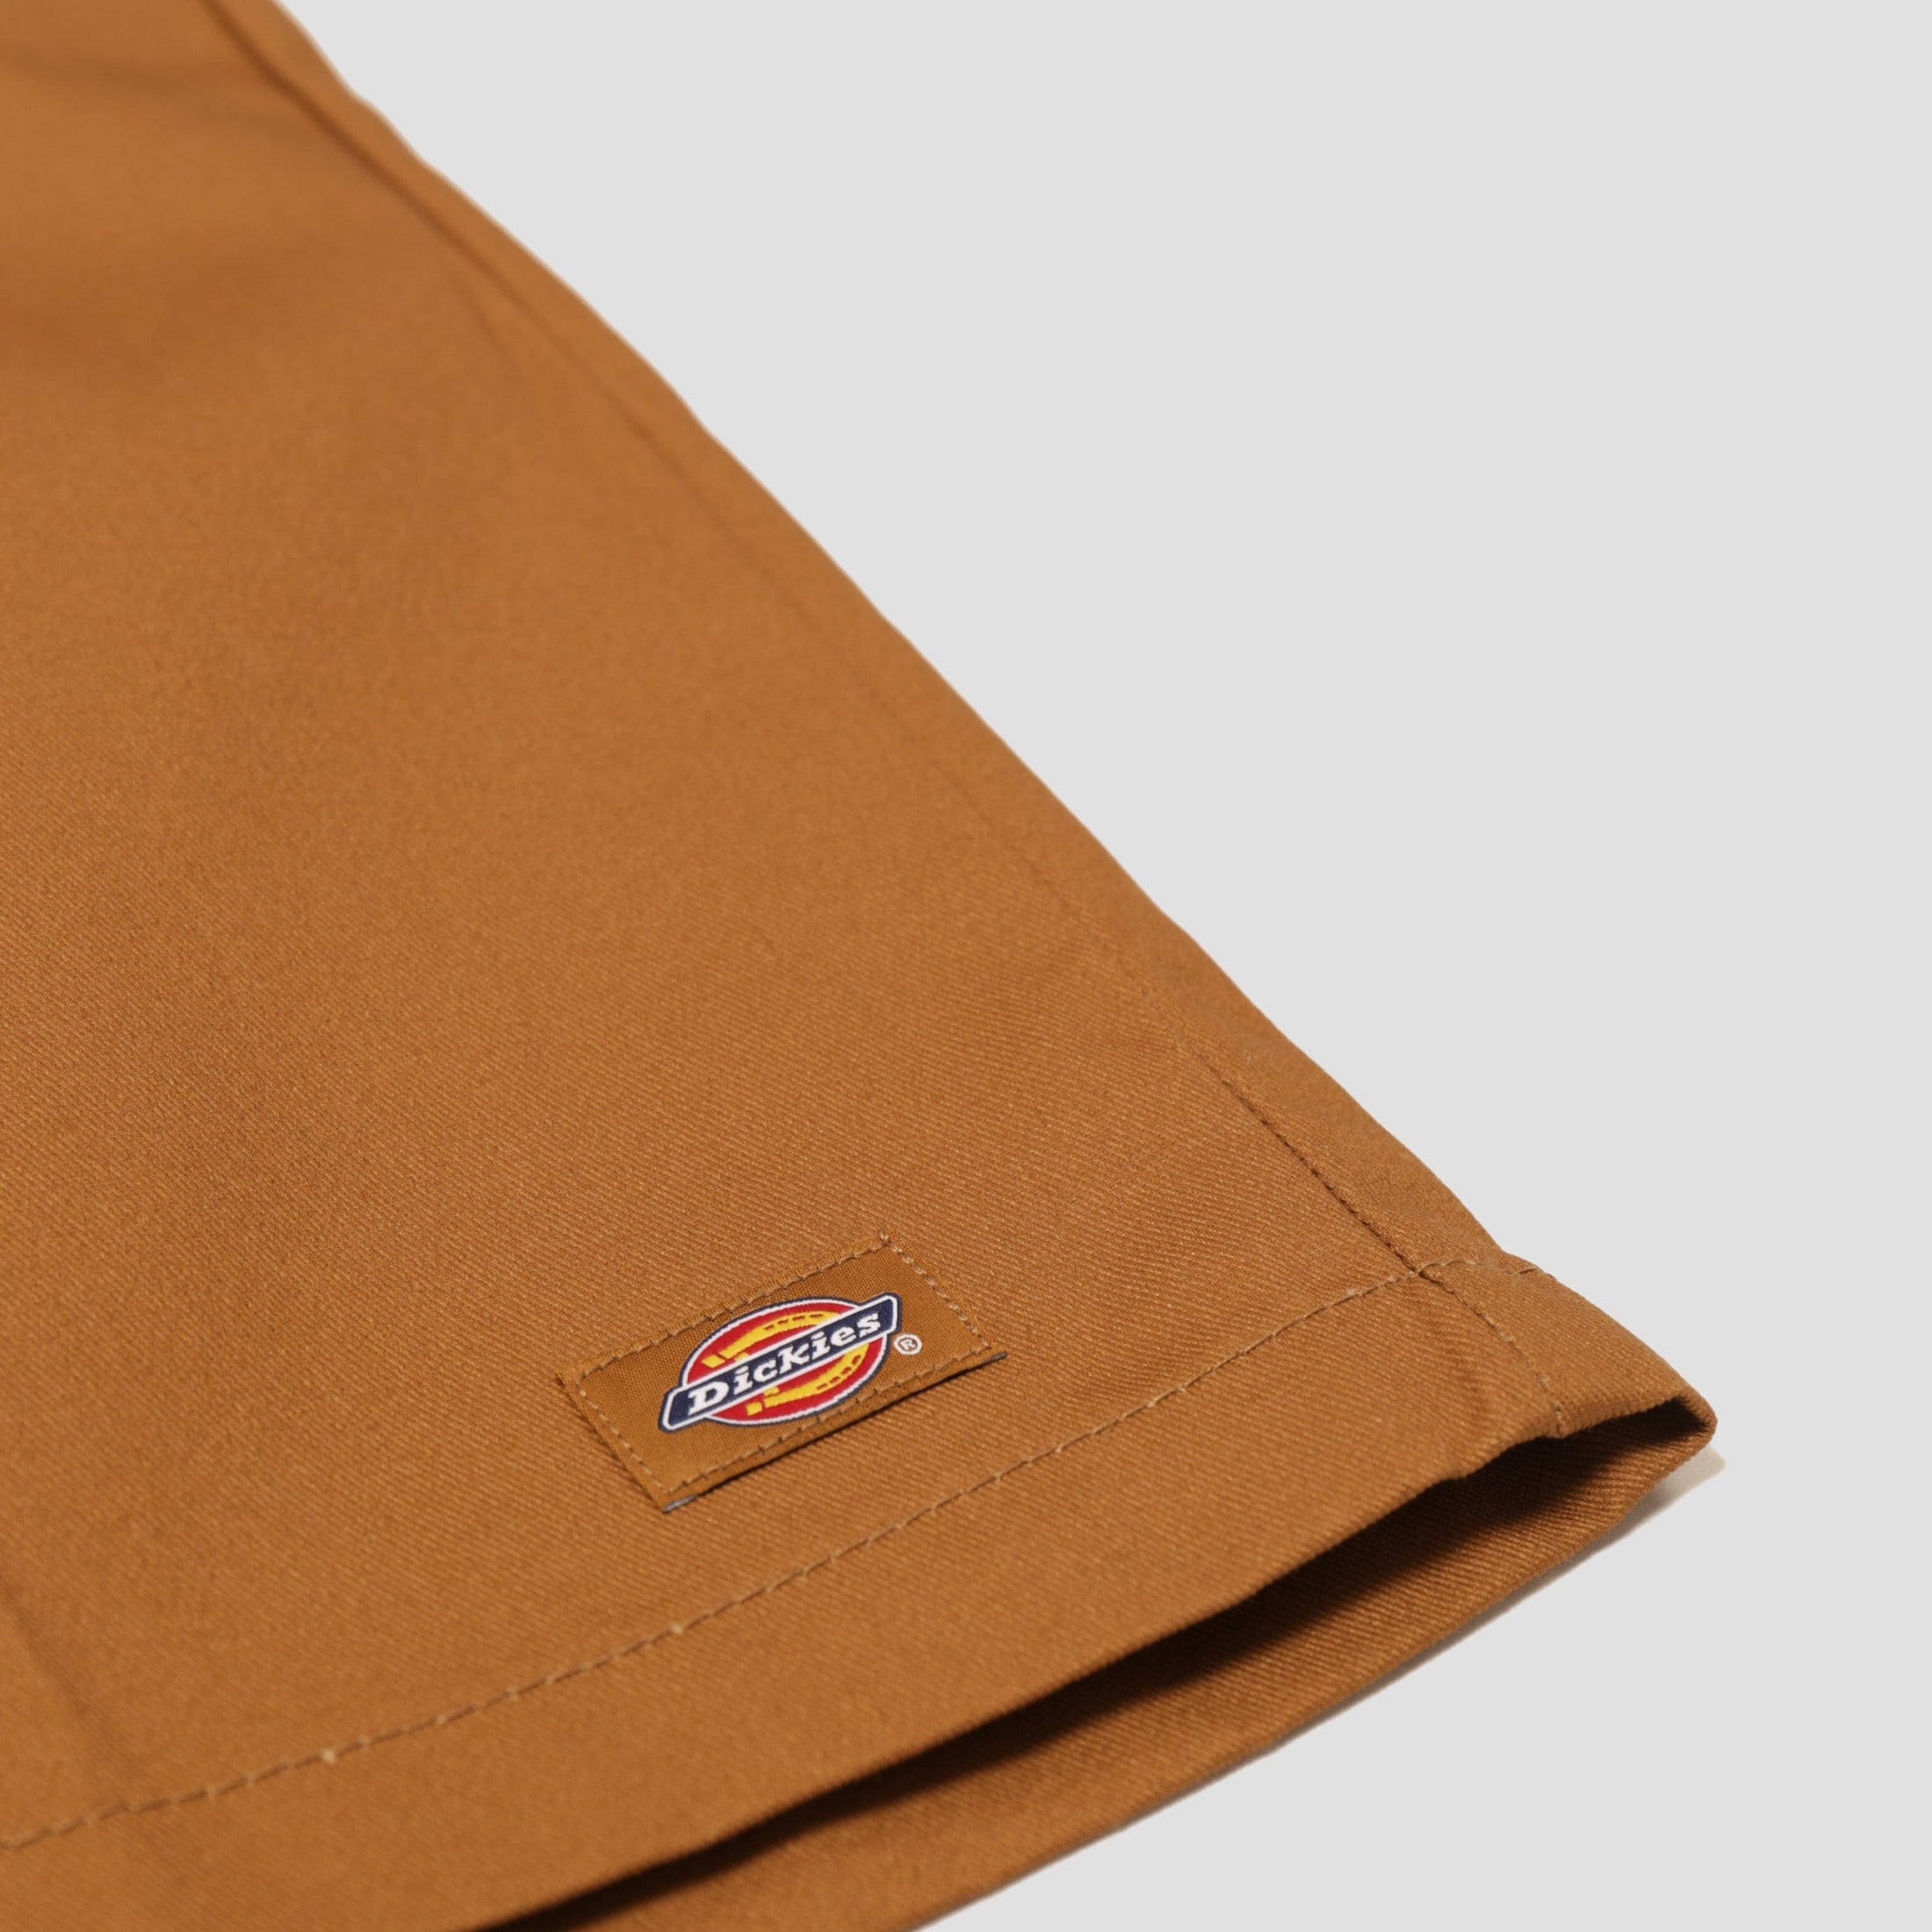 Dickies 874 Work Pant Recycled Olive Green – Slam City Skates